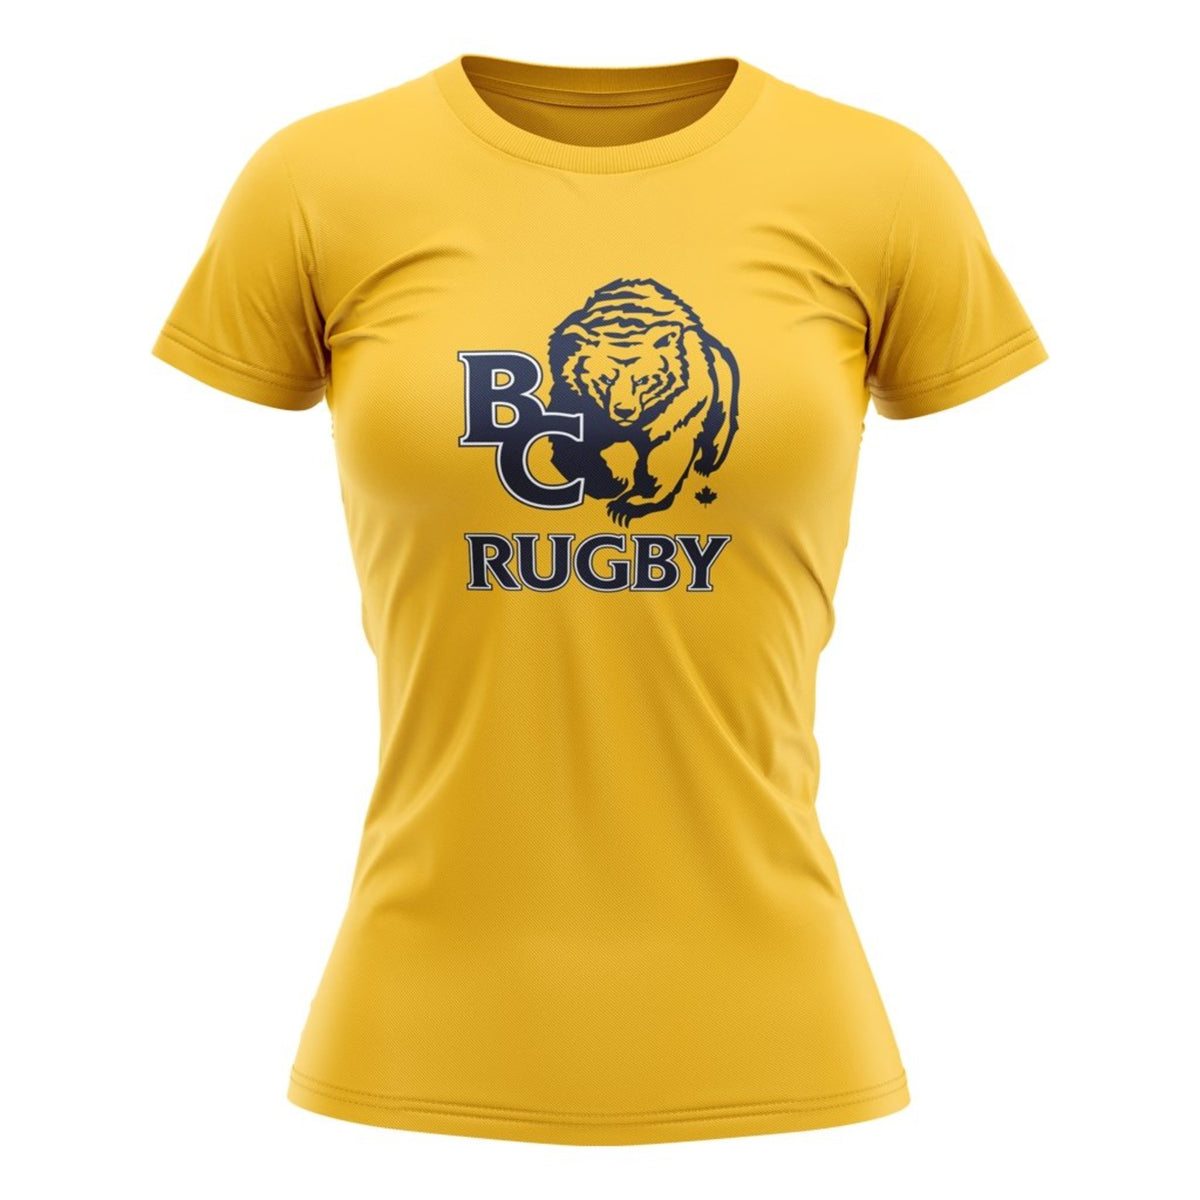 BC Rugby 2021 &quot;Team&quot; Tee - Women&#39;s Navy/Grey/White/Gold - www.therugbyshop.com www.therugbyshop.com WOMENS / GOLD / XS XIX Brands TEES BC Rugby 2021 &quot;Team&quot; Tee - Women&#39;s Navy/Grey/White/Gold